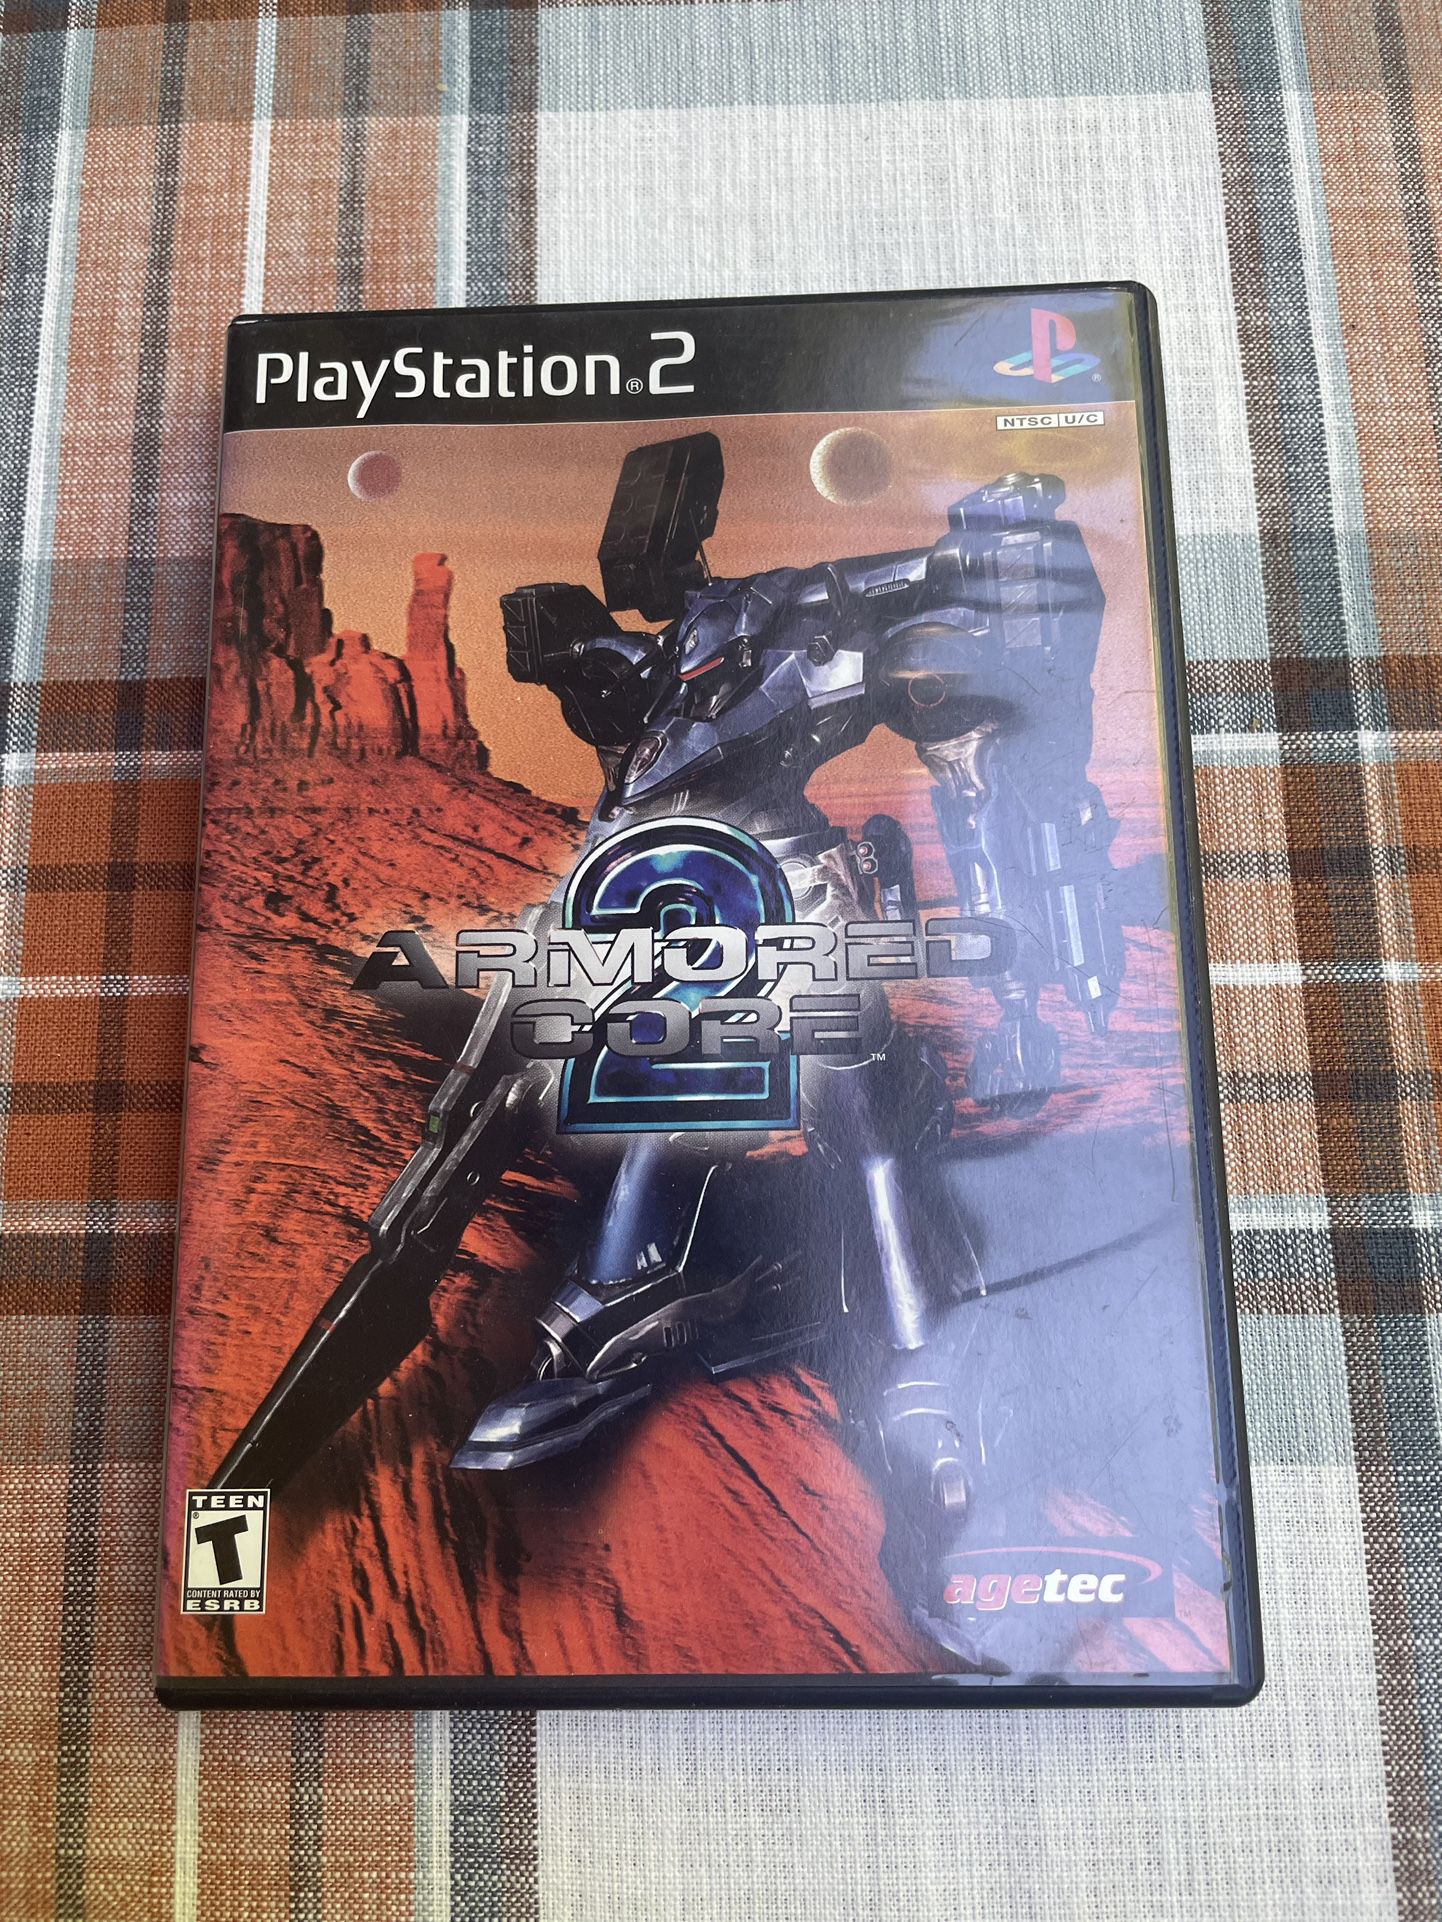 PlayStation 2 Armored Core 2 for Sale in Issaquah, WA - OfferUp